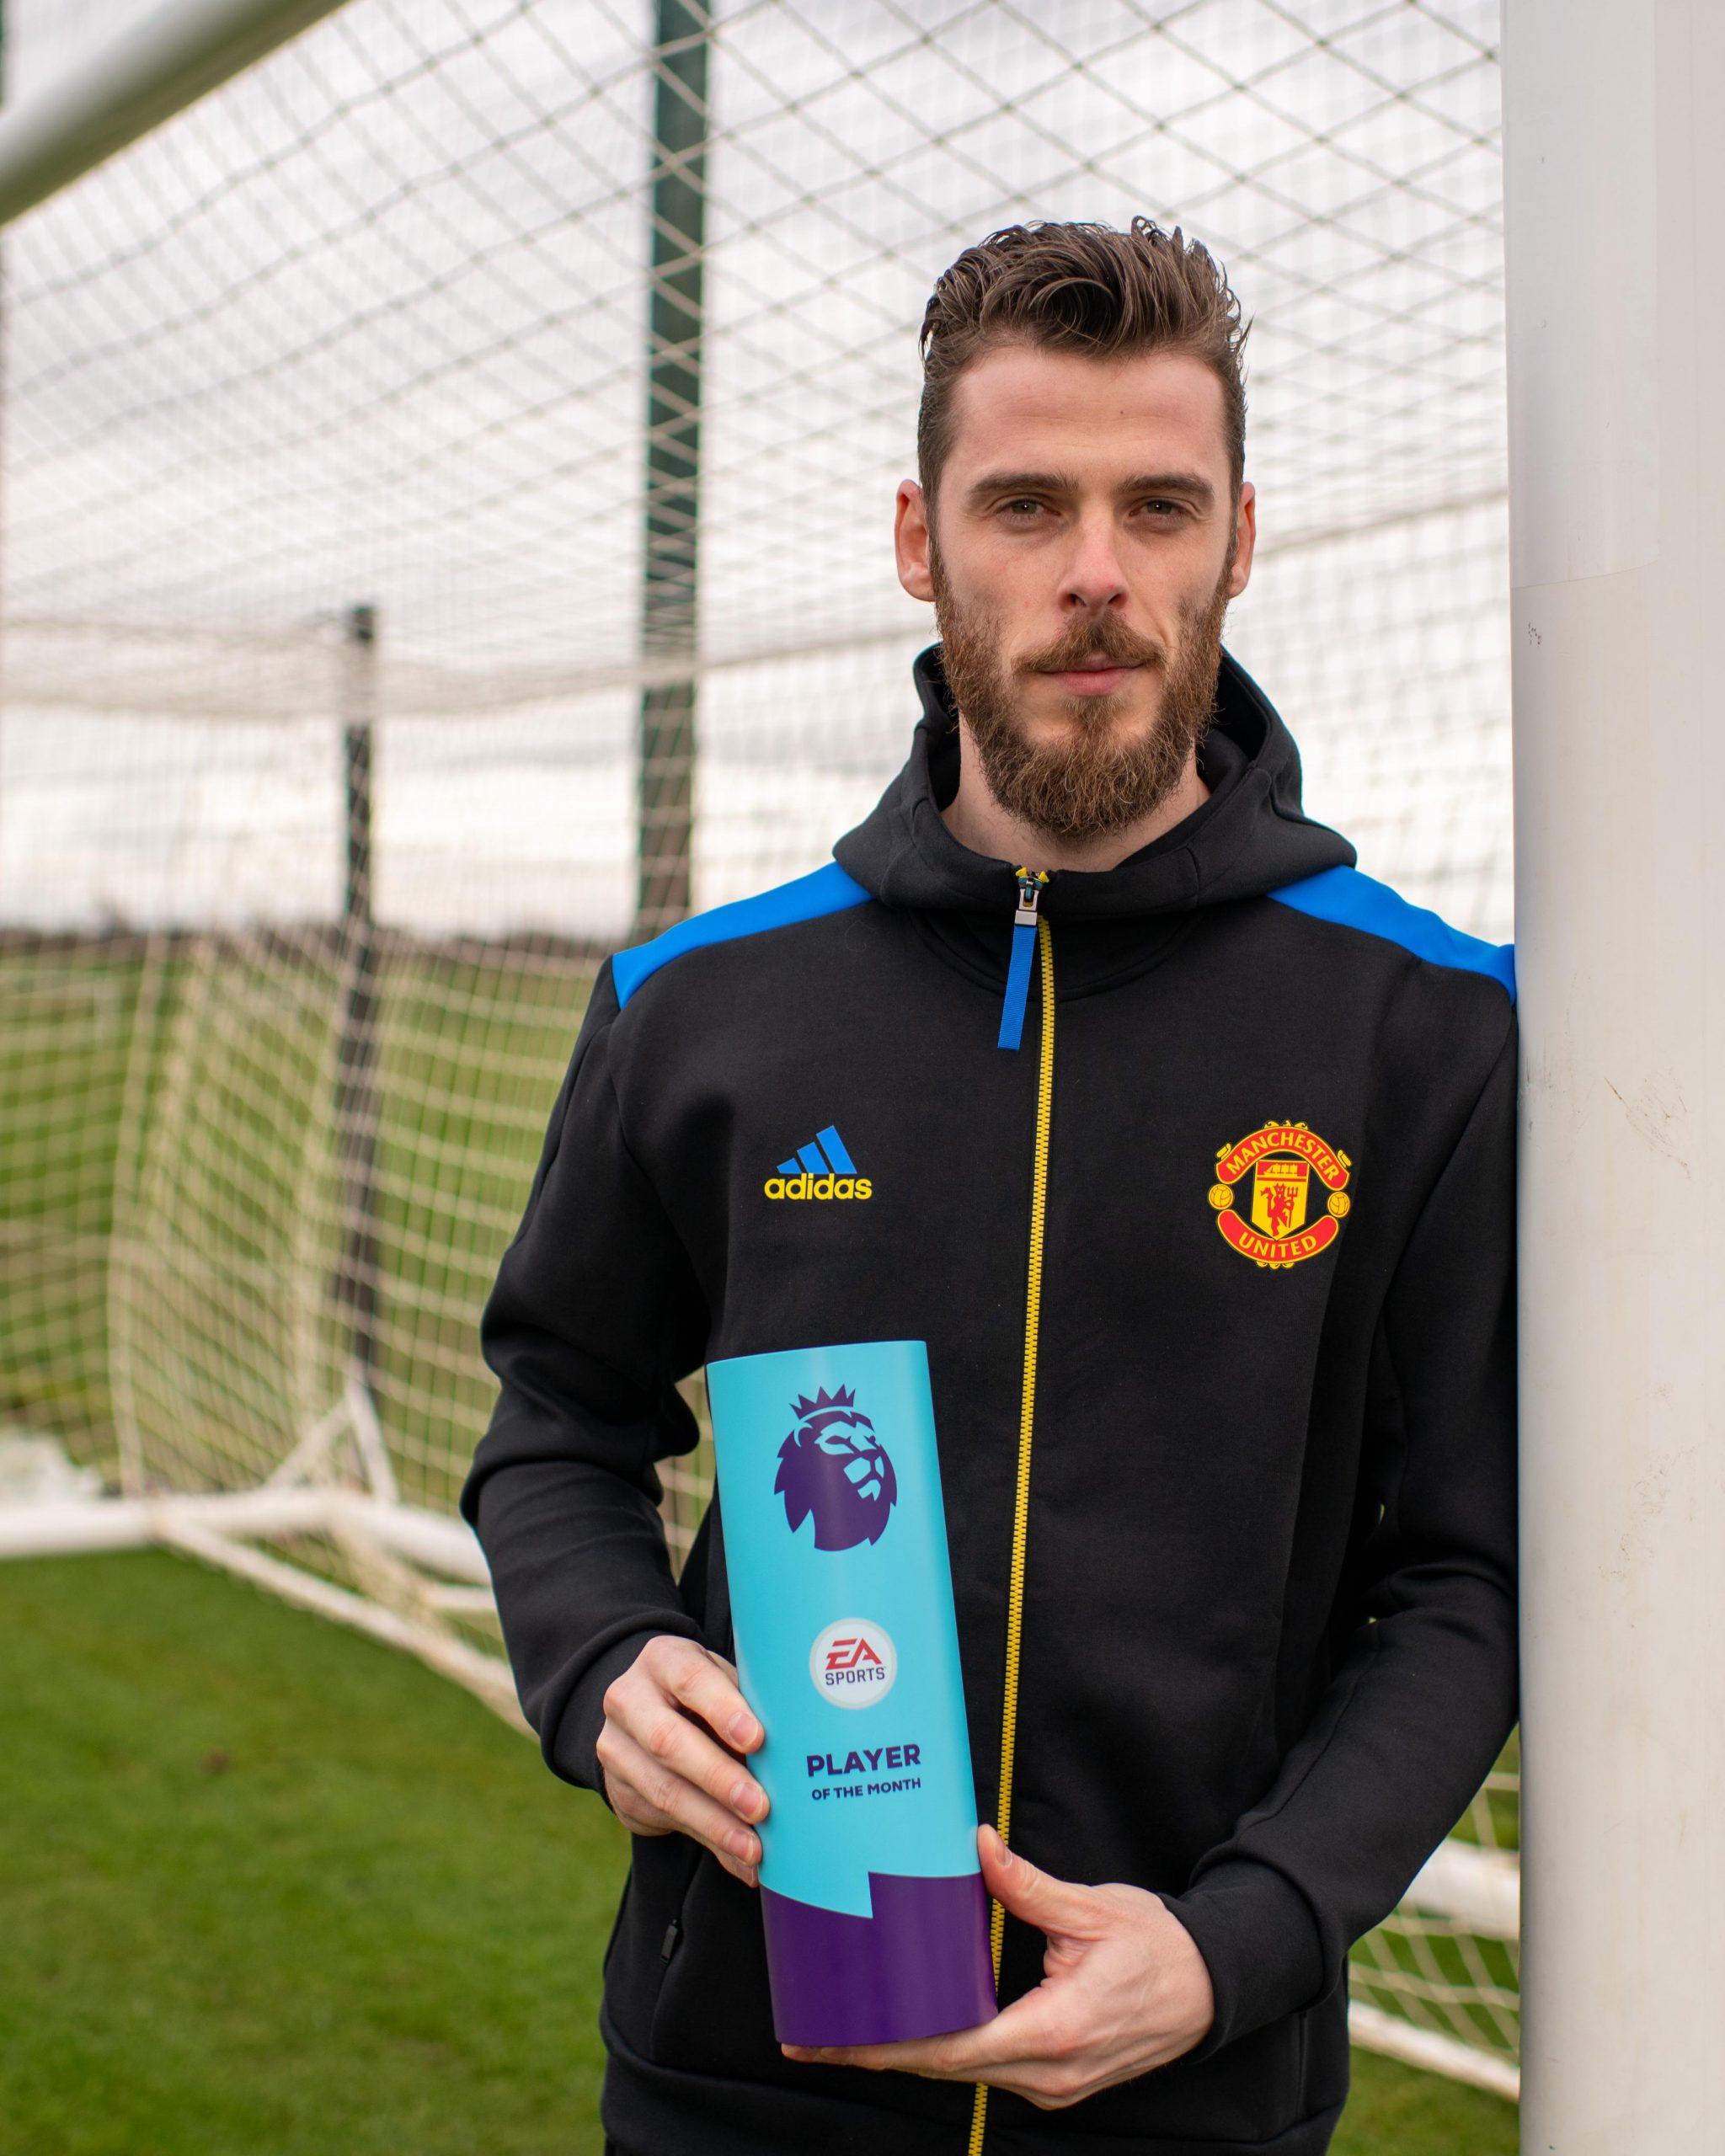 Manchester United superstar, David de Gea has backed the Red Devils to strongly challenge for a top-four finish in the Premier League this season..